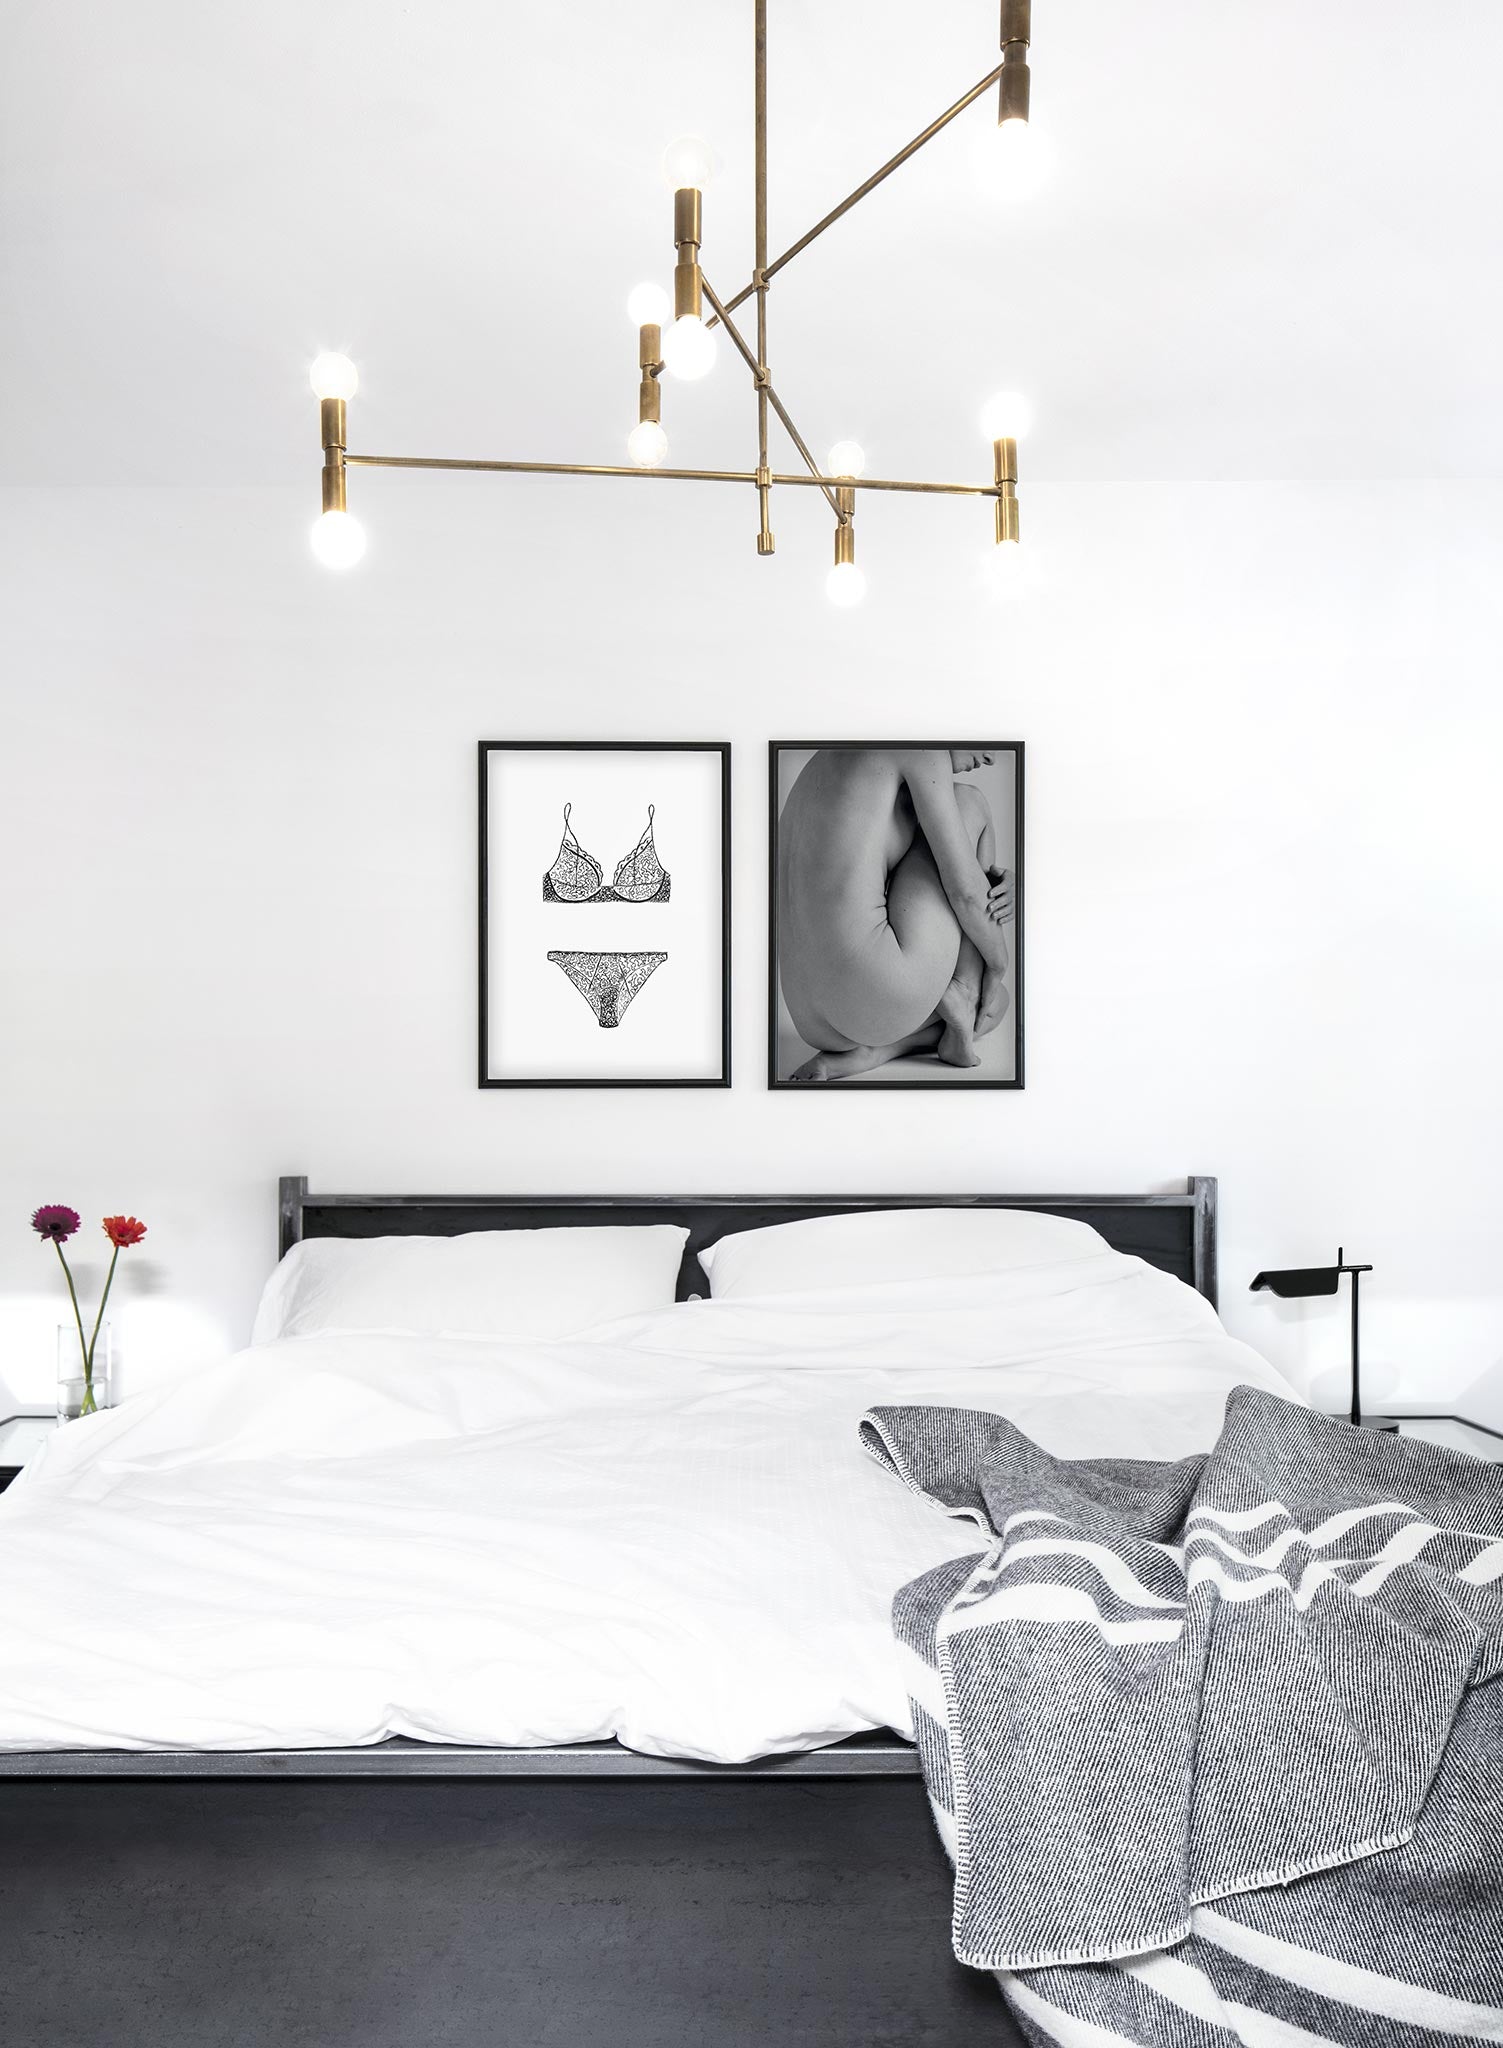 Fashion illustration poster by Opposite Wall with lingerie - Lifestyle Duo - Bedroom